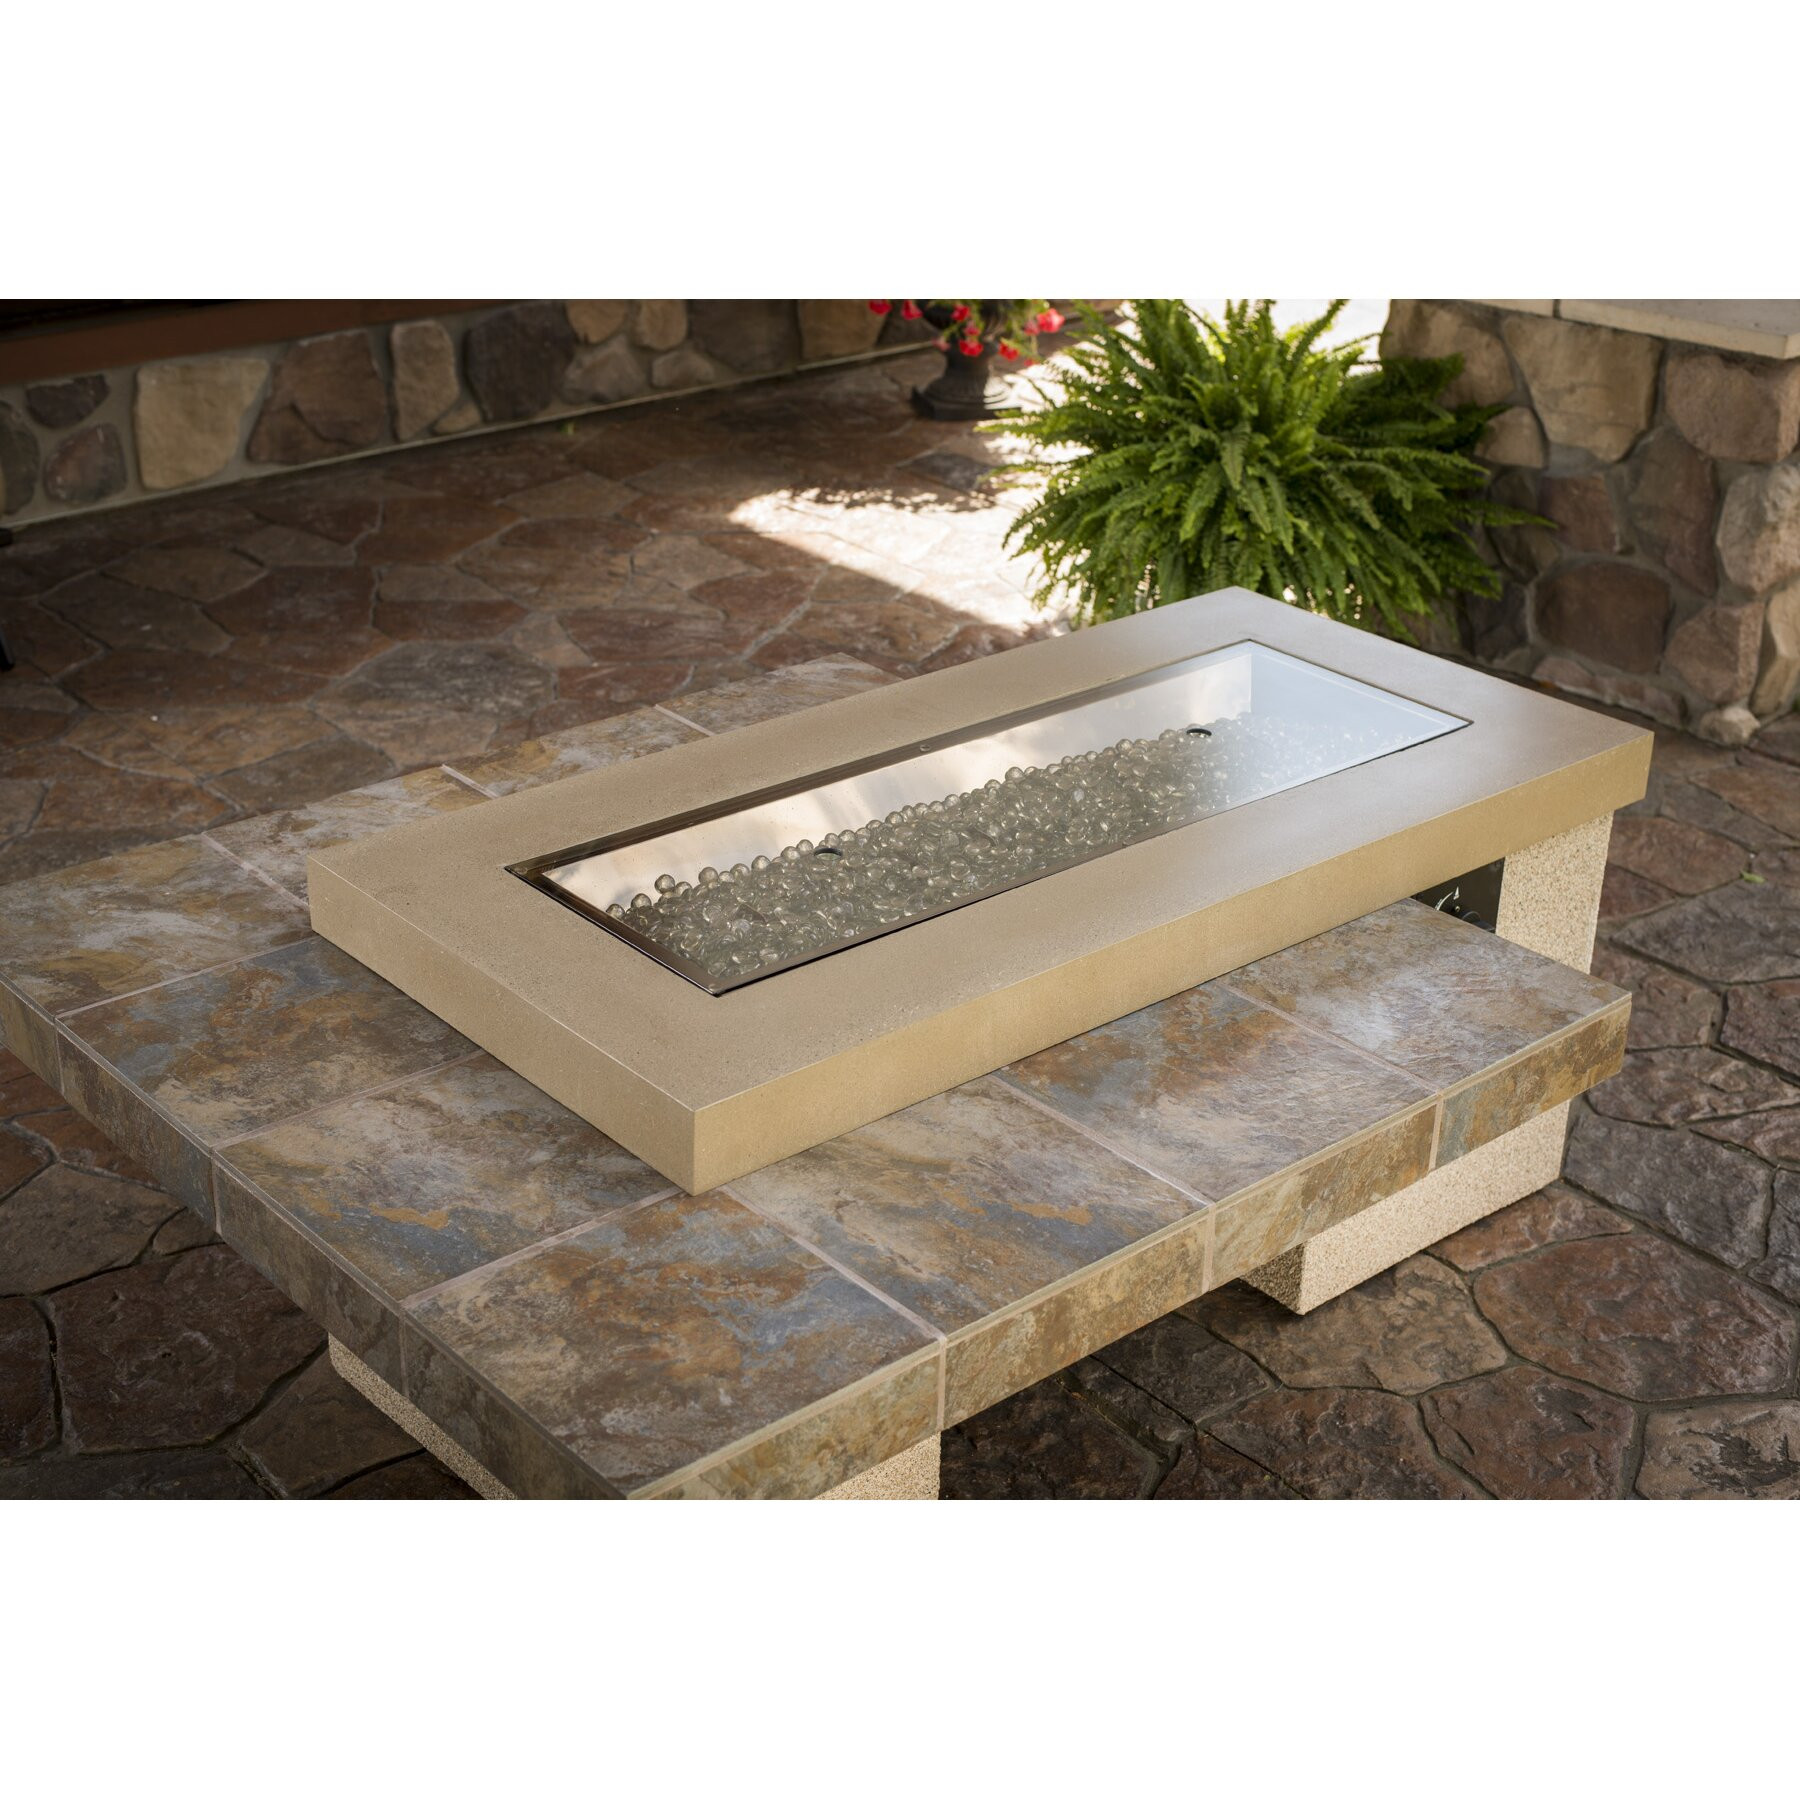 Outdoor Firepit Table
 The Outdoor GreatRoom pany Uptown Crystal Fire Pit